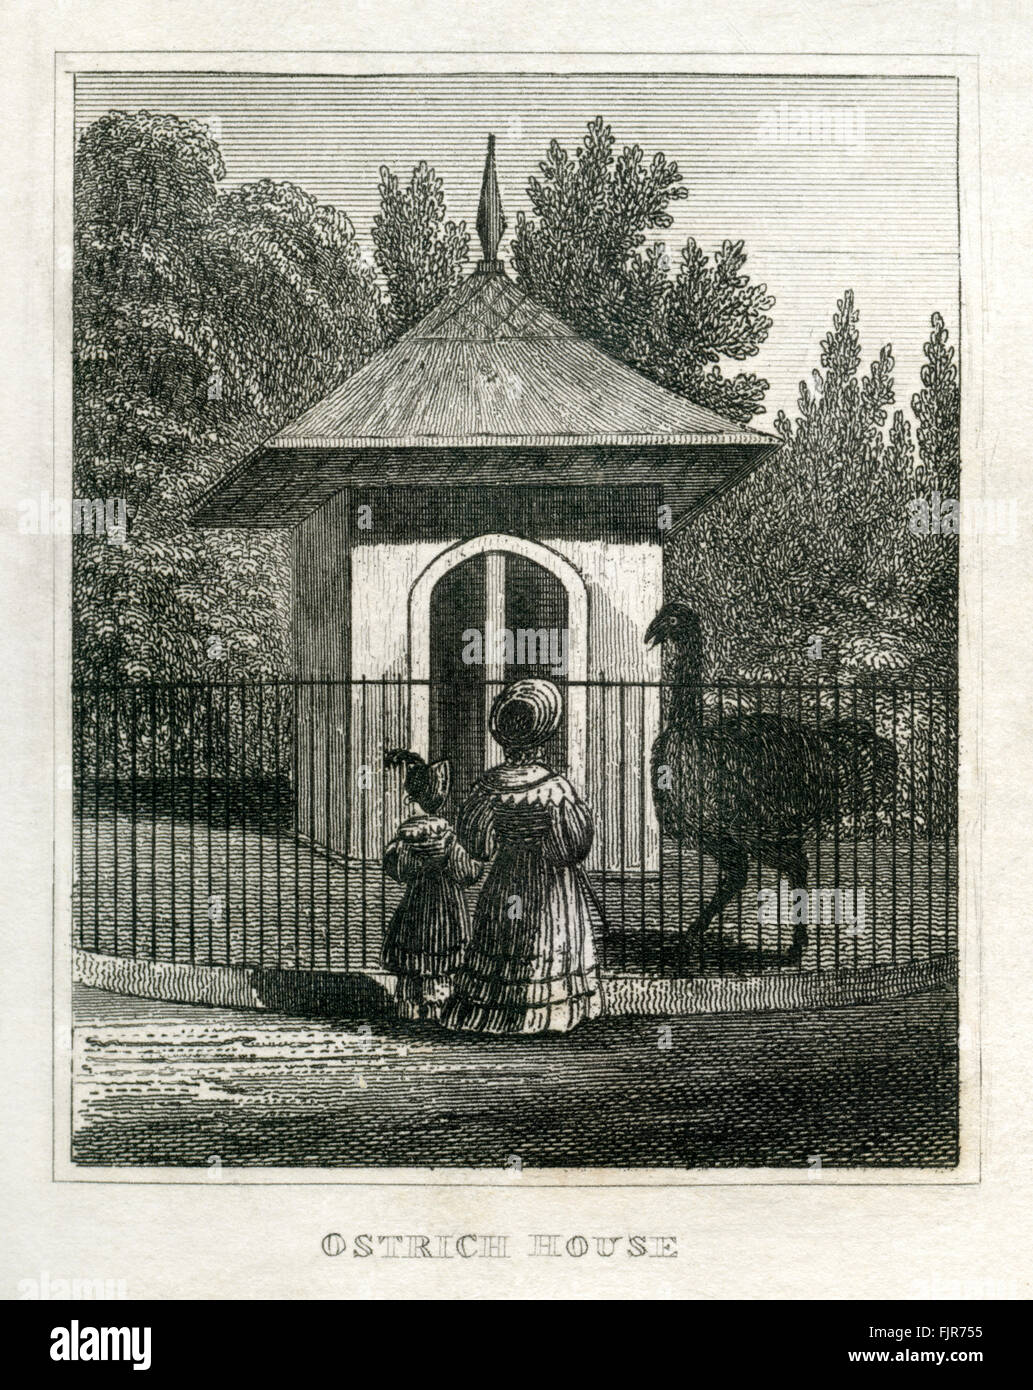 Ostrich house, Regent's Park Zoological Gardens, London. From 1835 print. Stock Photo